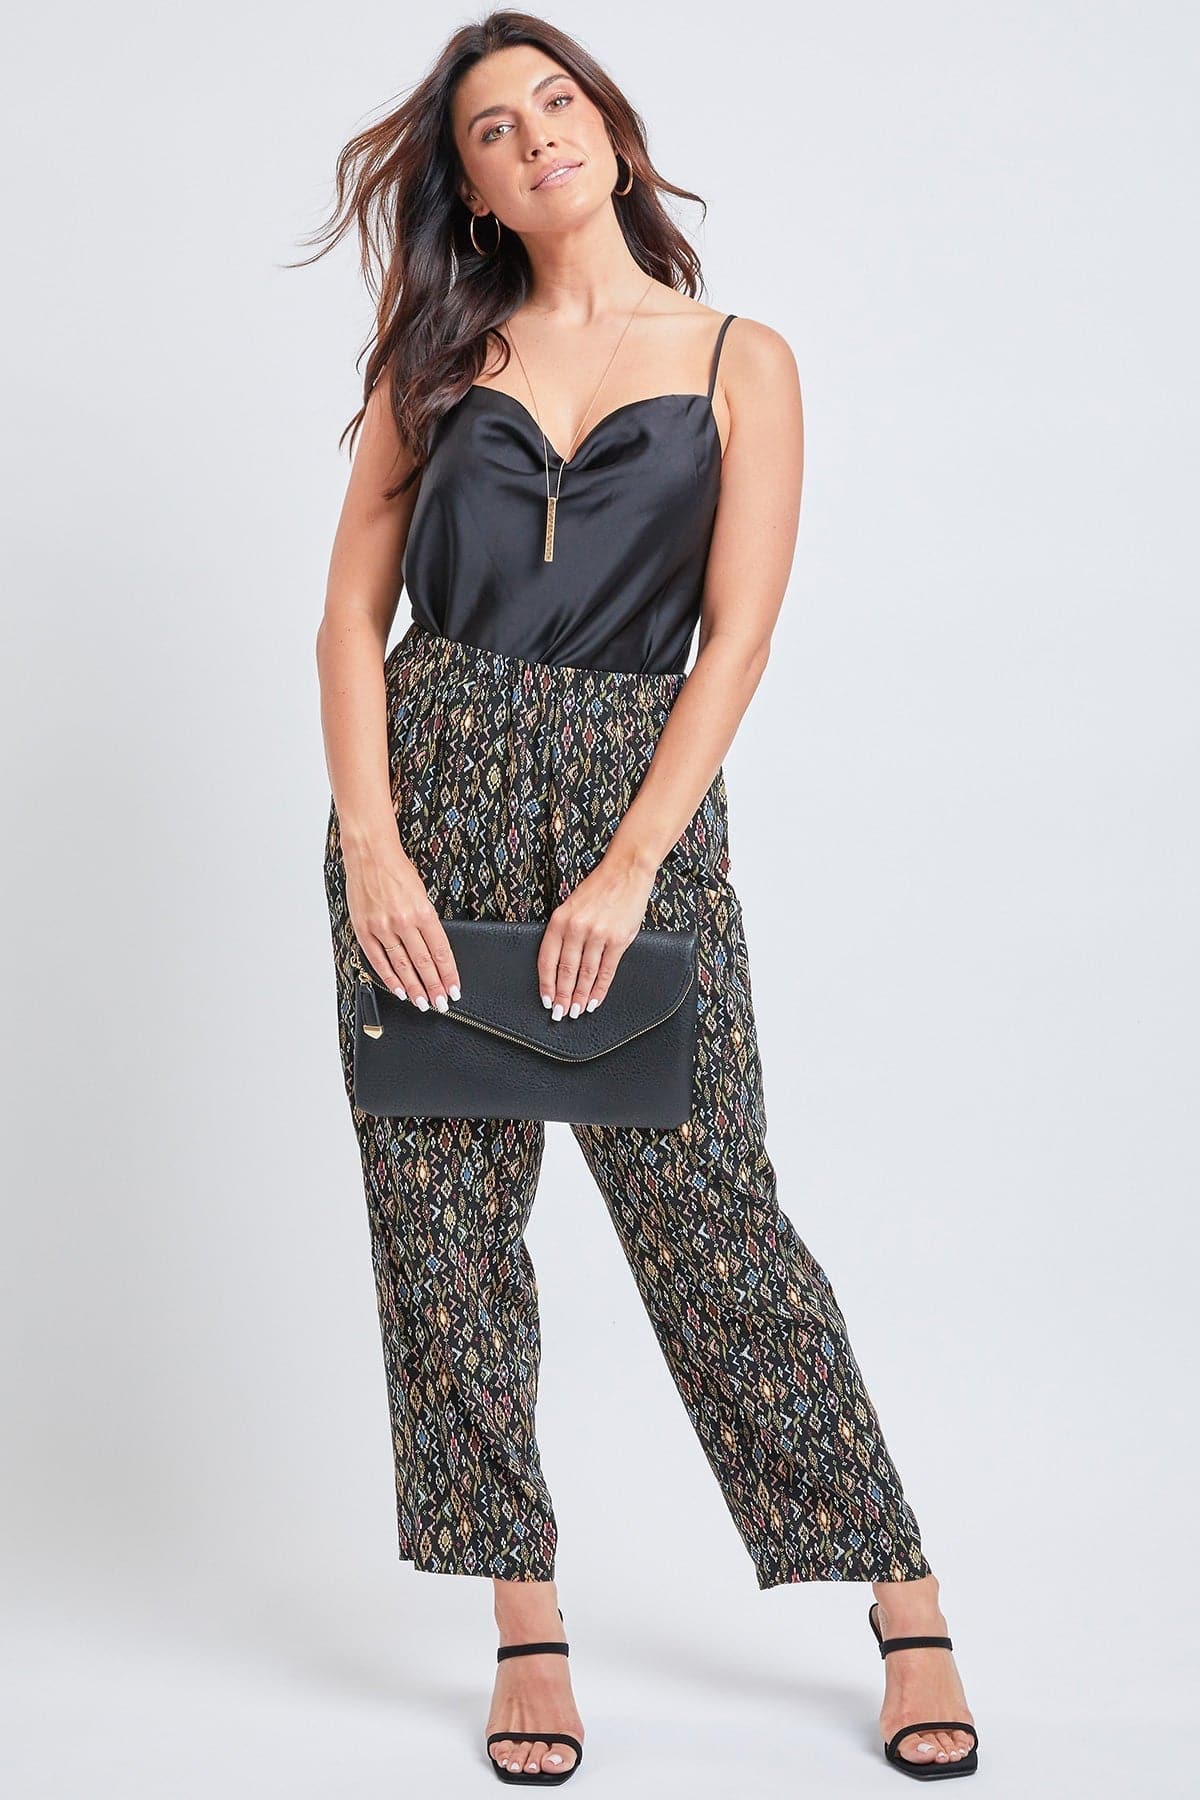 Pull On Relaxed Rise Pant With Drapey Pocket Detail Tapered Leg 1